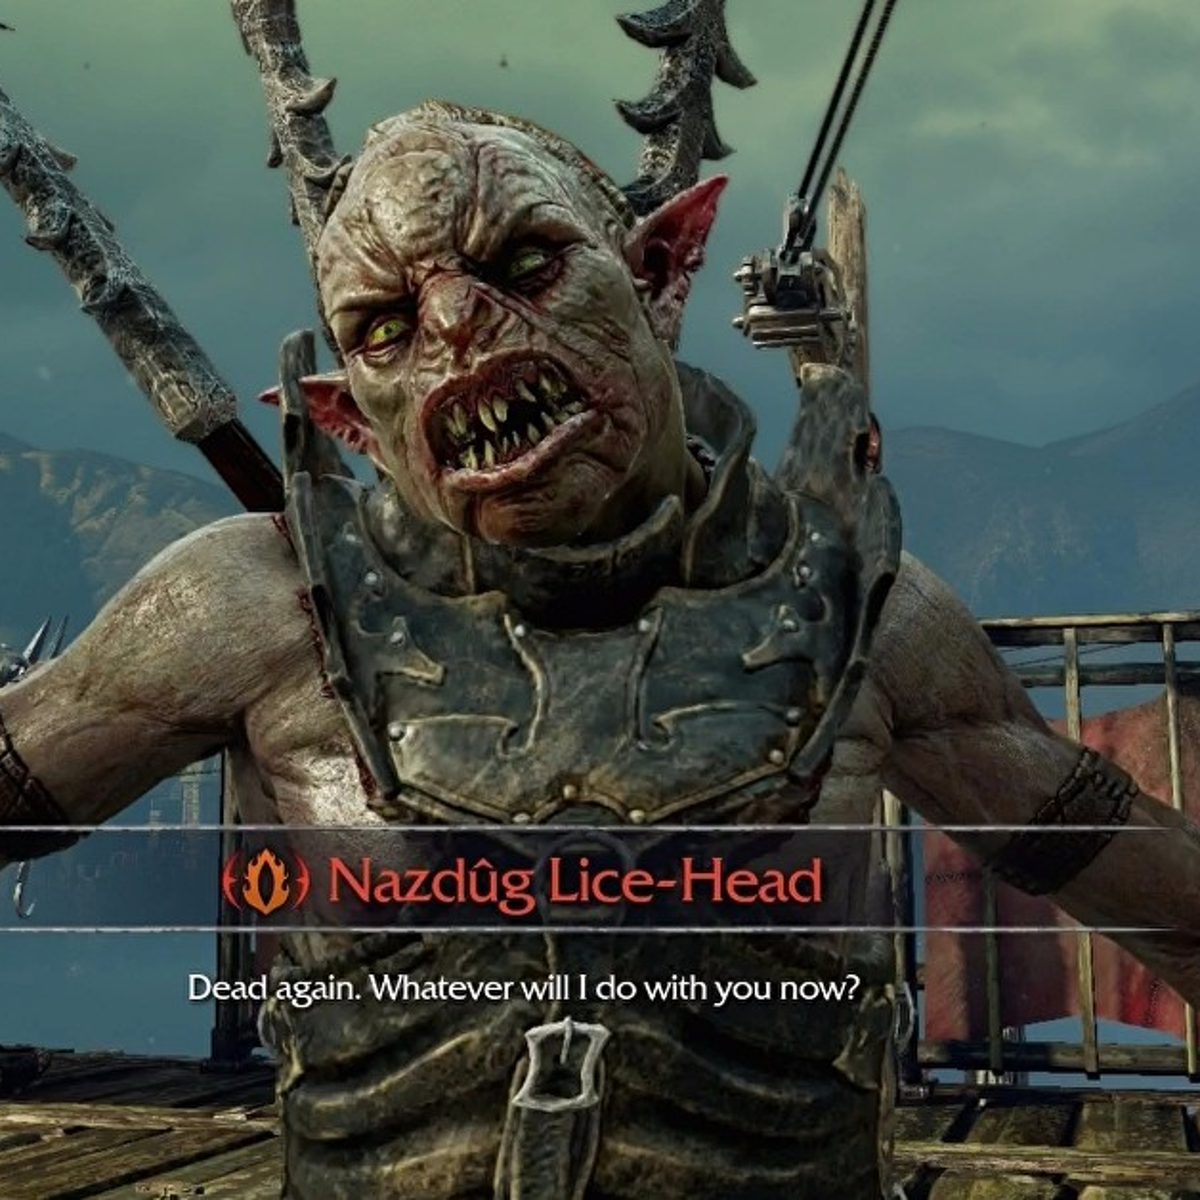 Warner Bros finally secures patent for Shadow of Mordor's Nemesis system